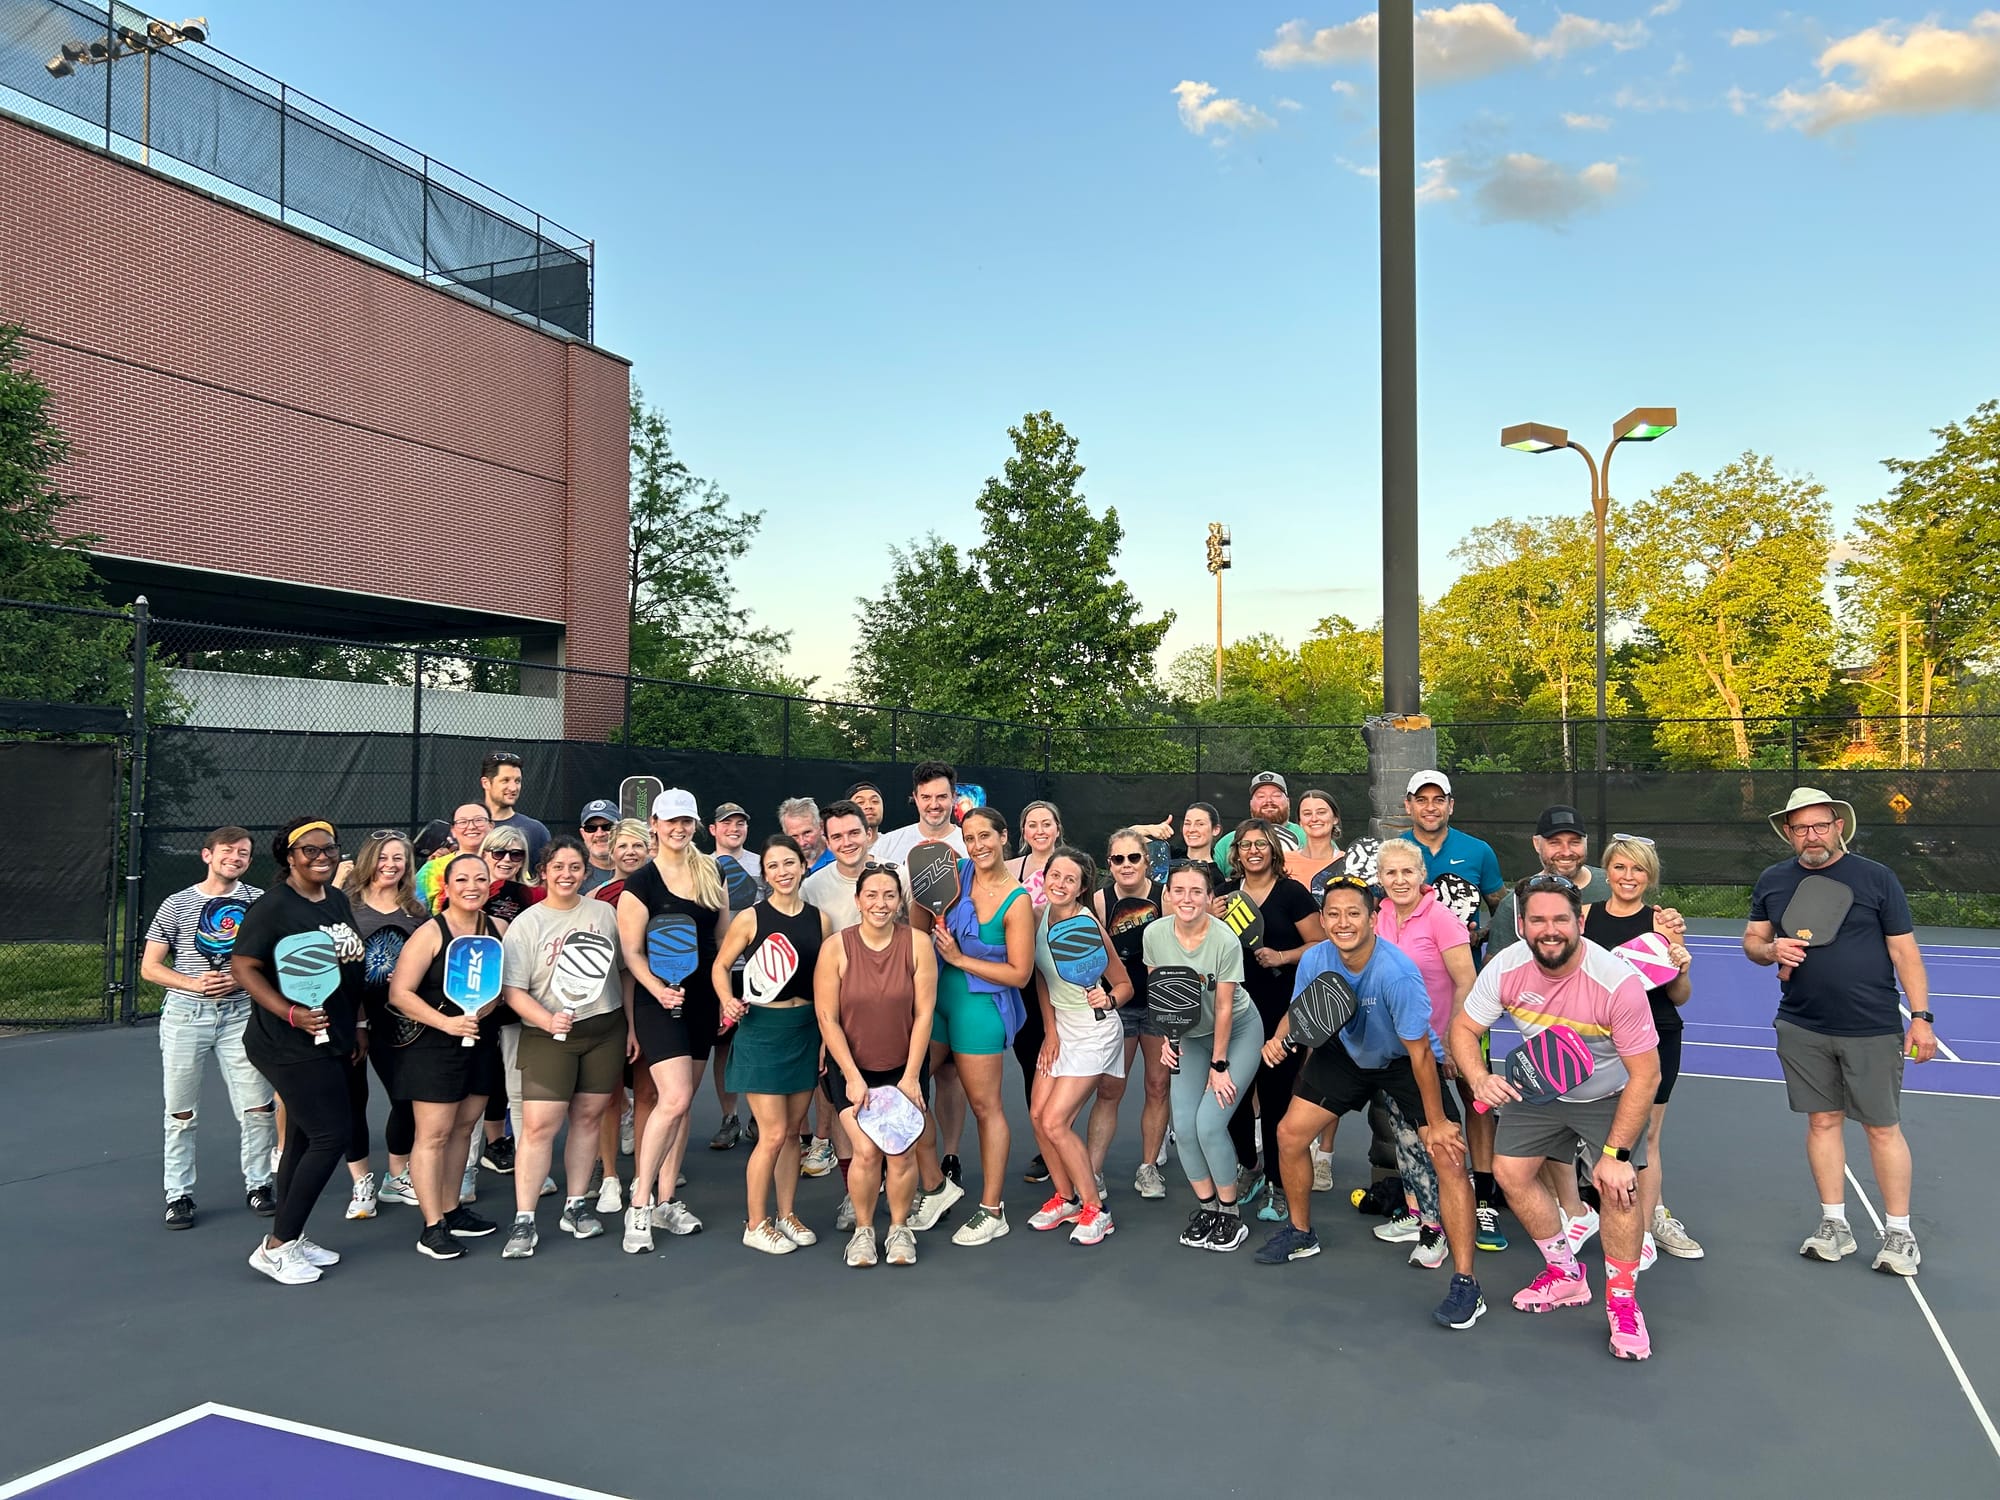 Exciting Pickleball Events and Updates Ahead In Nashville!